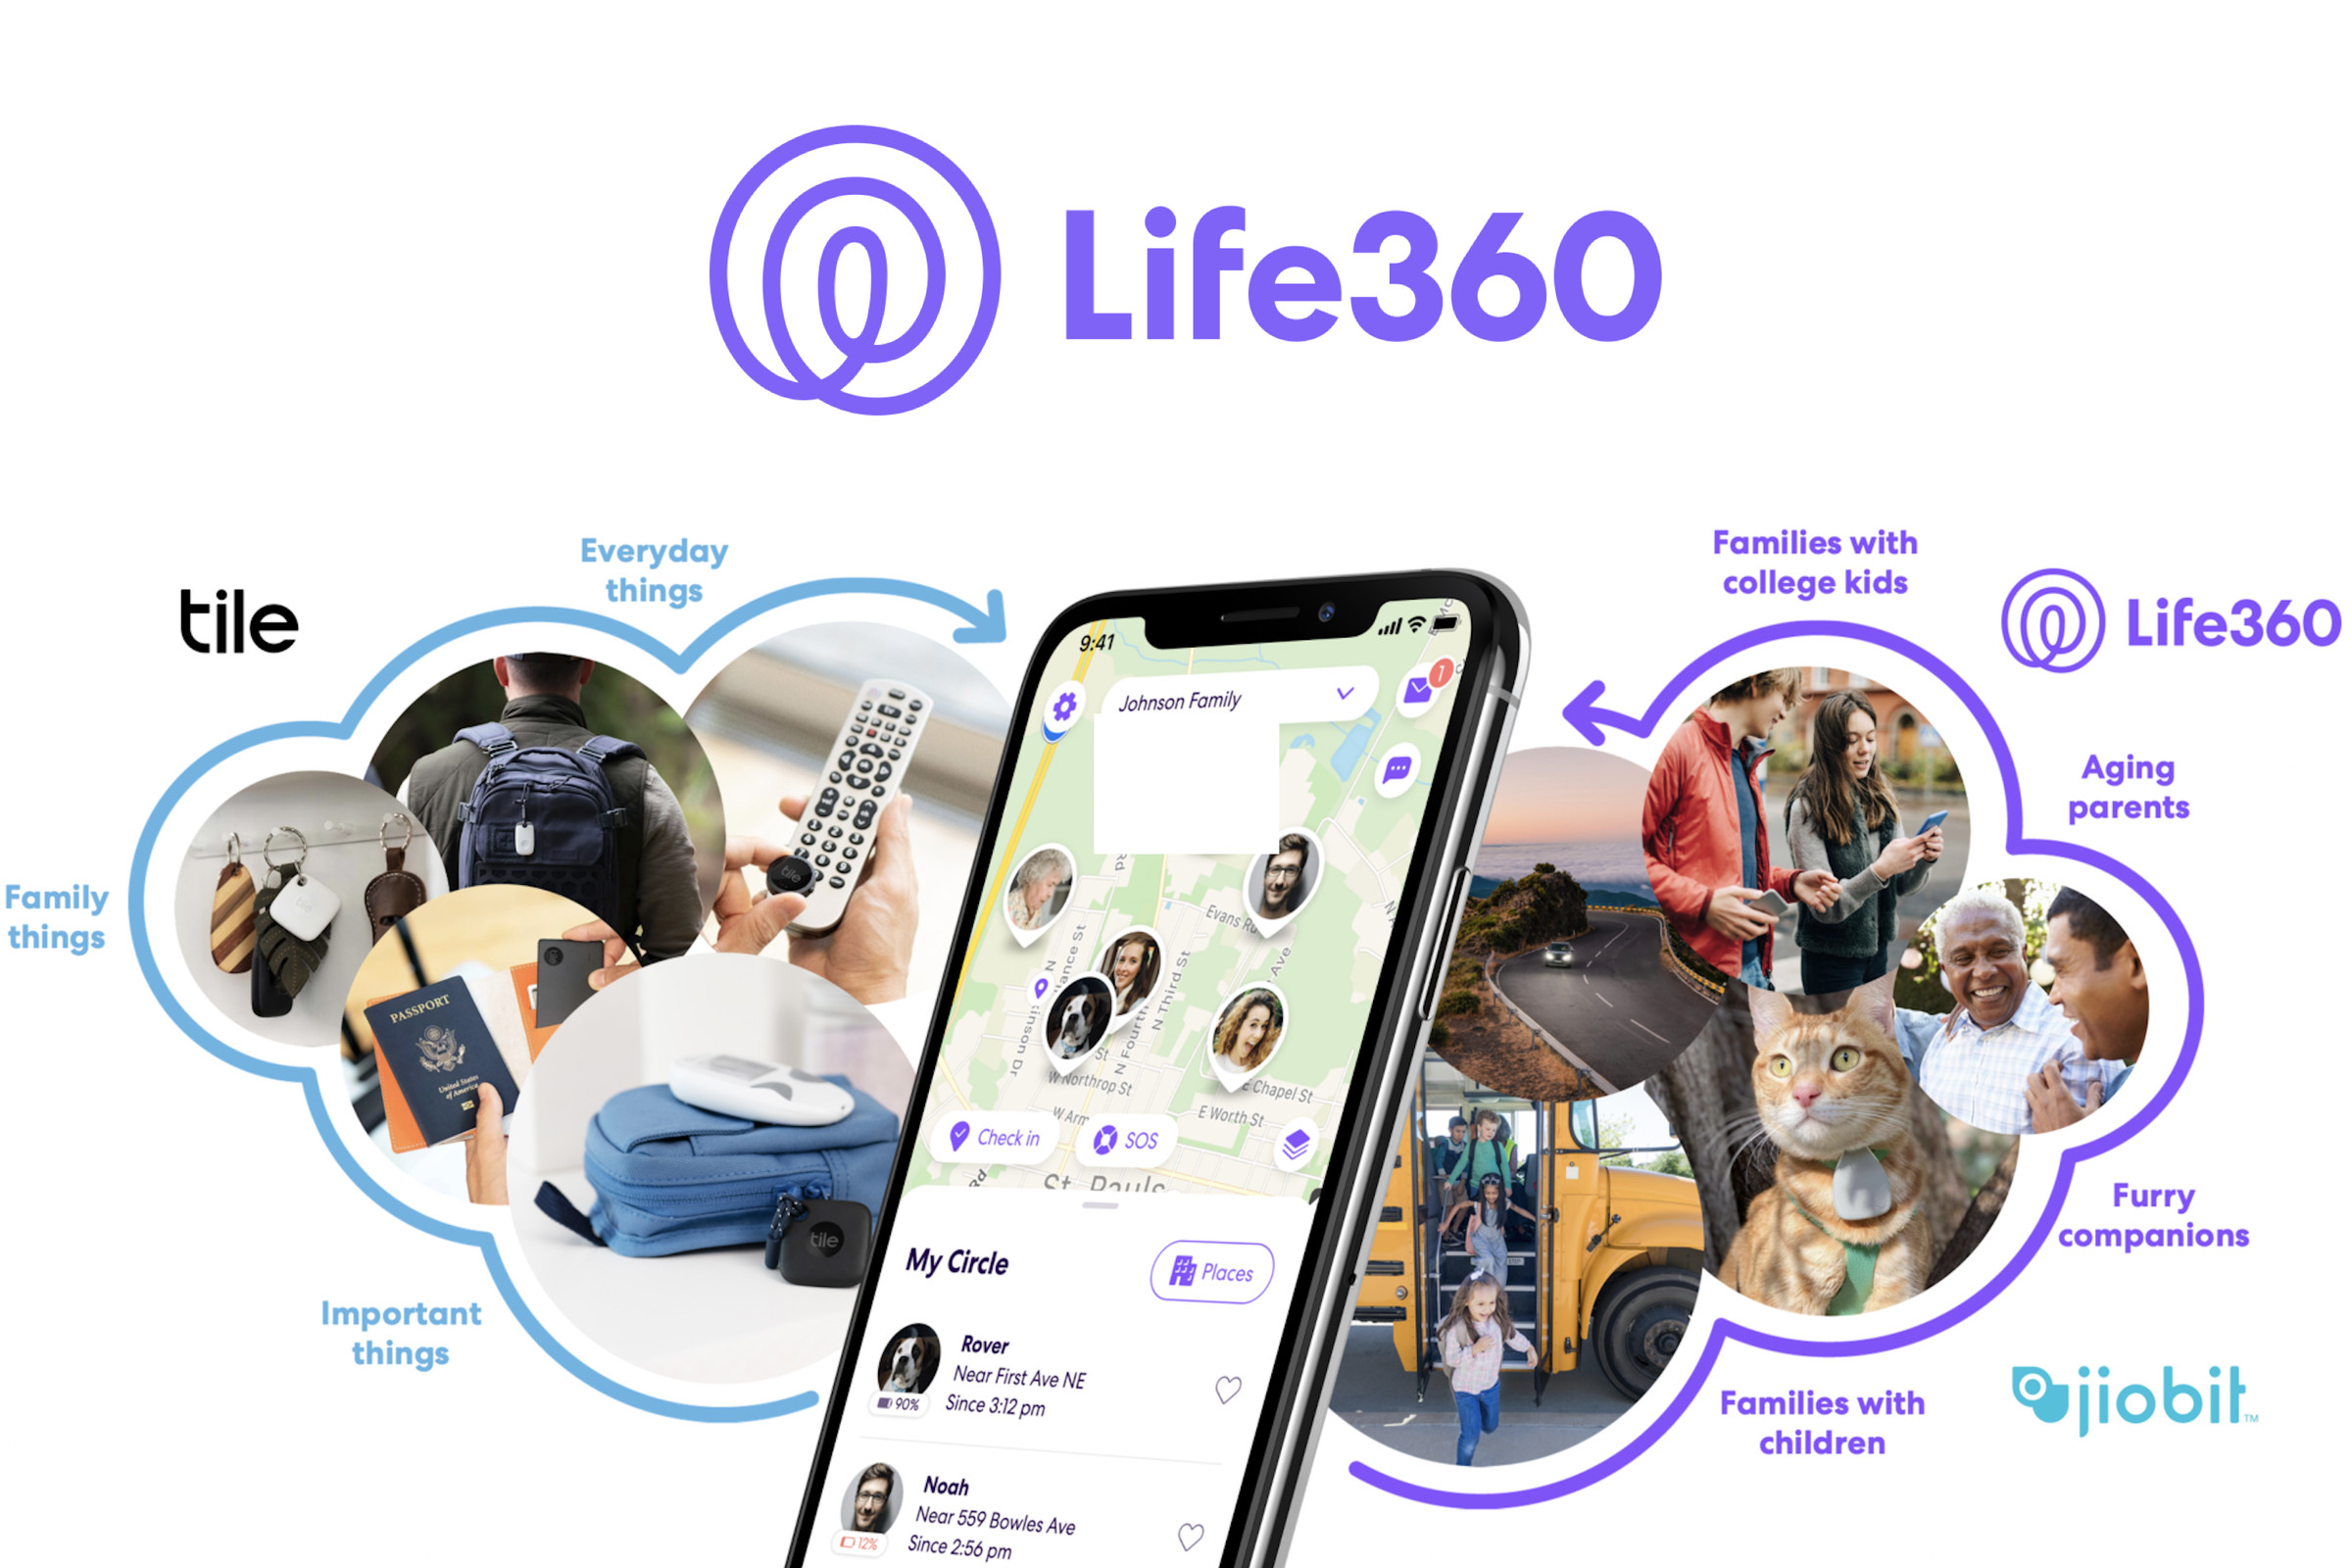 An iPhone is in the center showing the Life360 app with locations of family members on a map. Surrounding the iPhone are images of trackable items by Tile and people and pets for Life360.